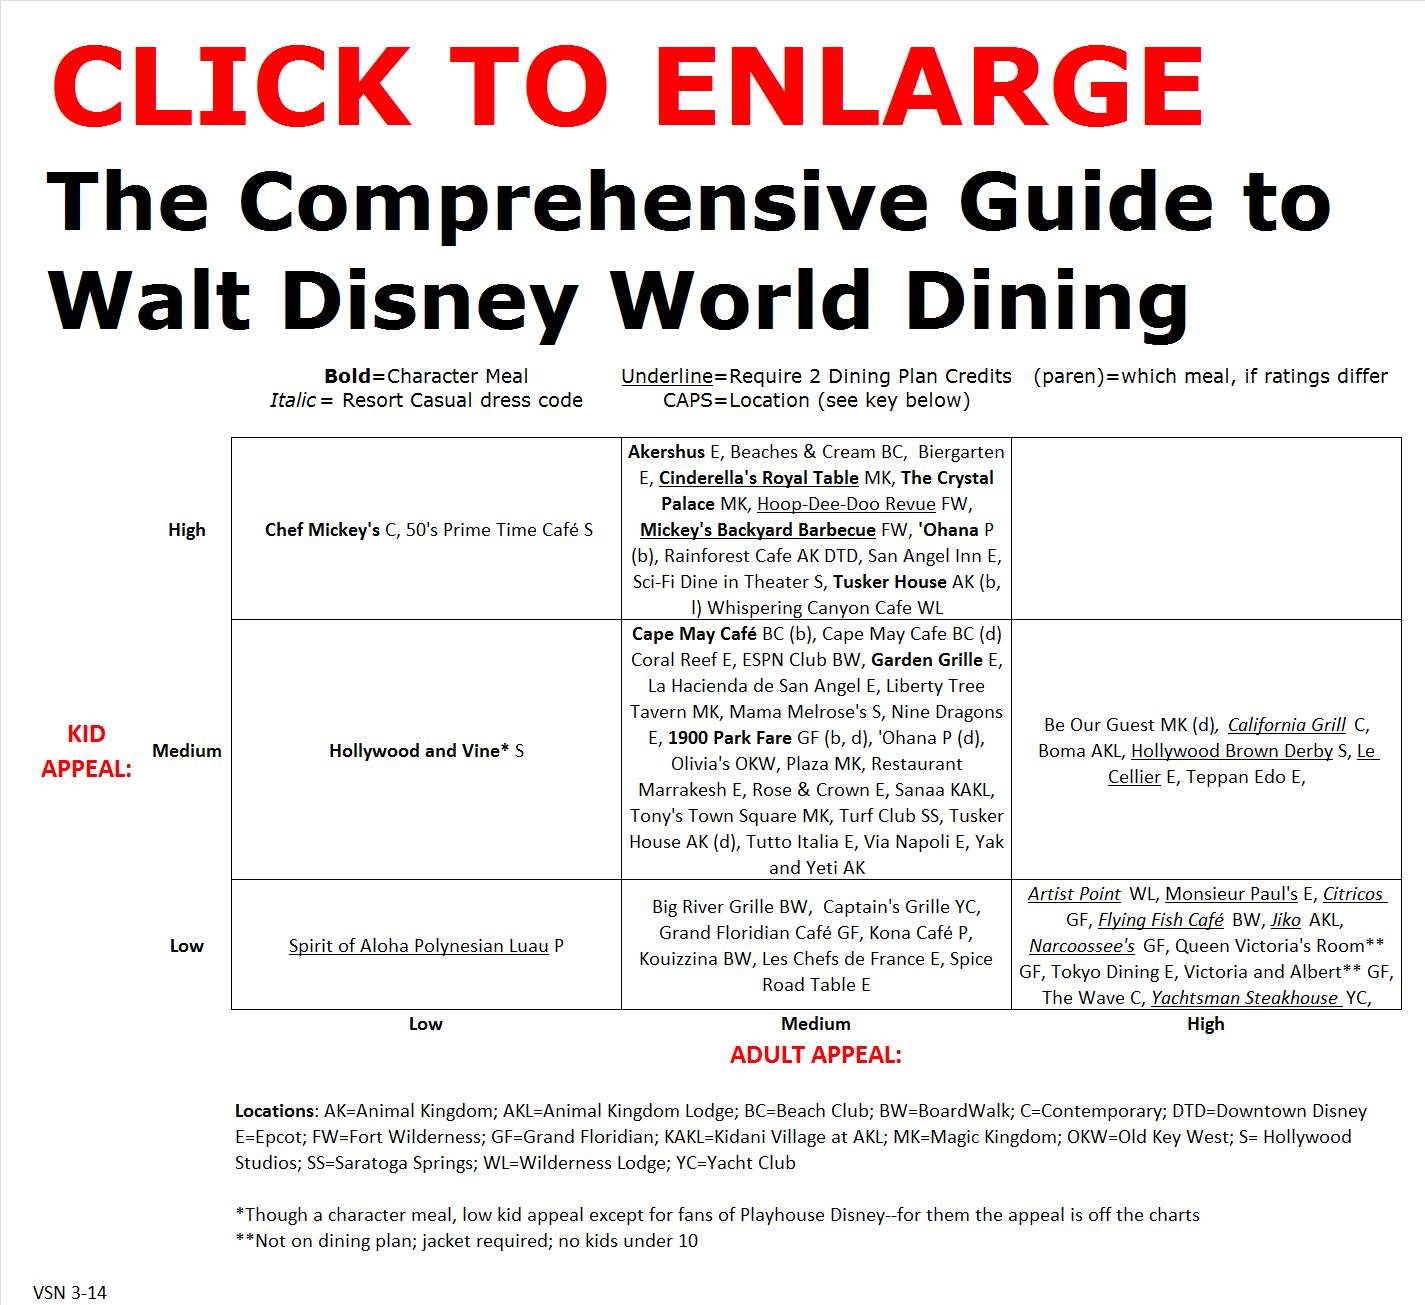 The Comprehensive Guide to Walt Disney World Dining